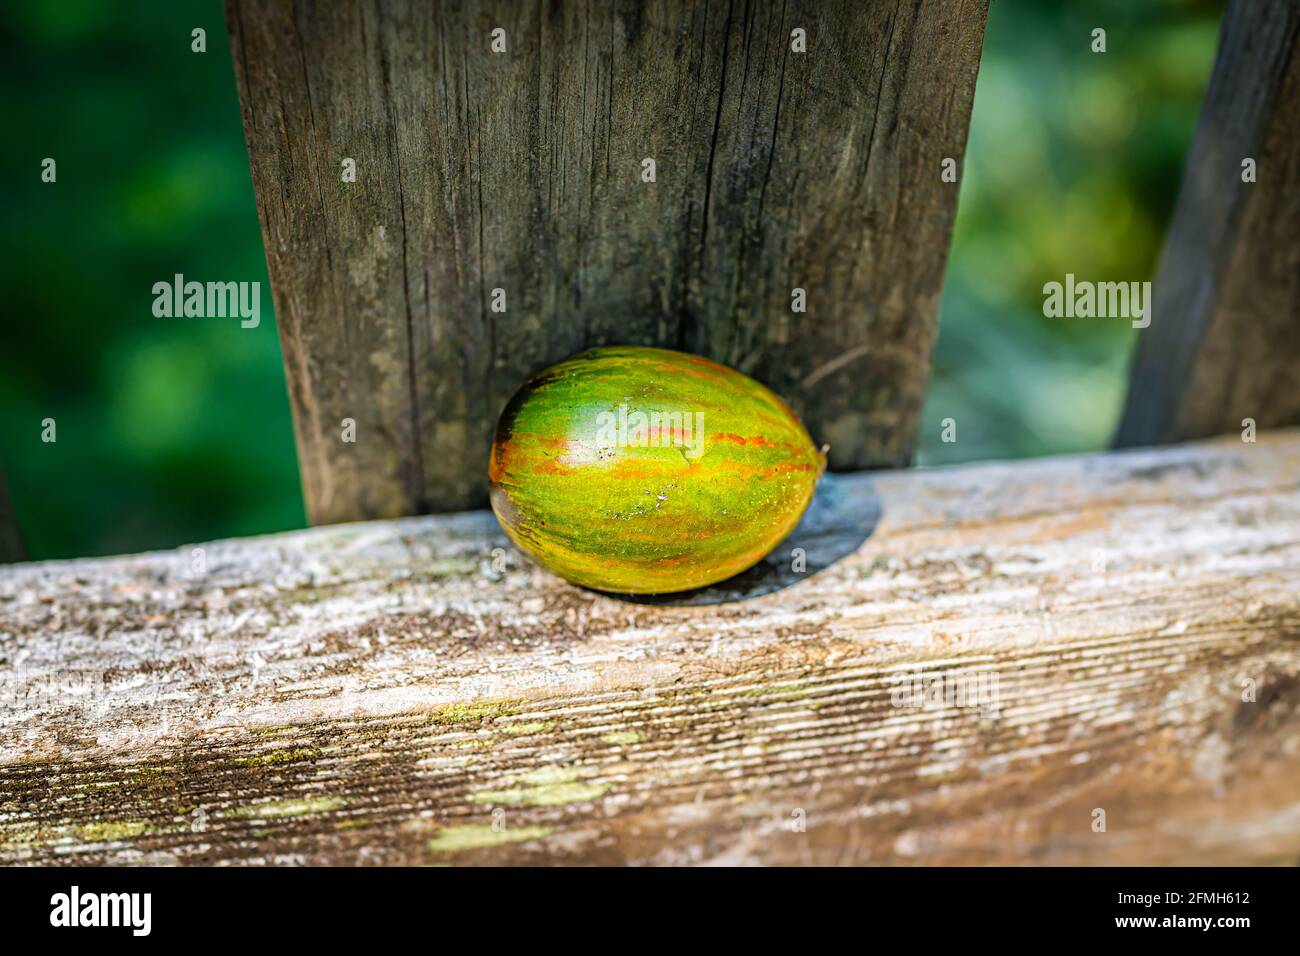 Macro closeup of one single green variety of grape tomato fruit on deck railing wooden in garden with orange red ripe striped vegetable Stock Photo